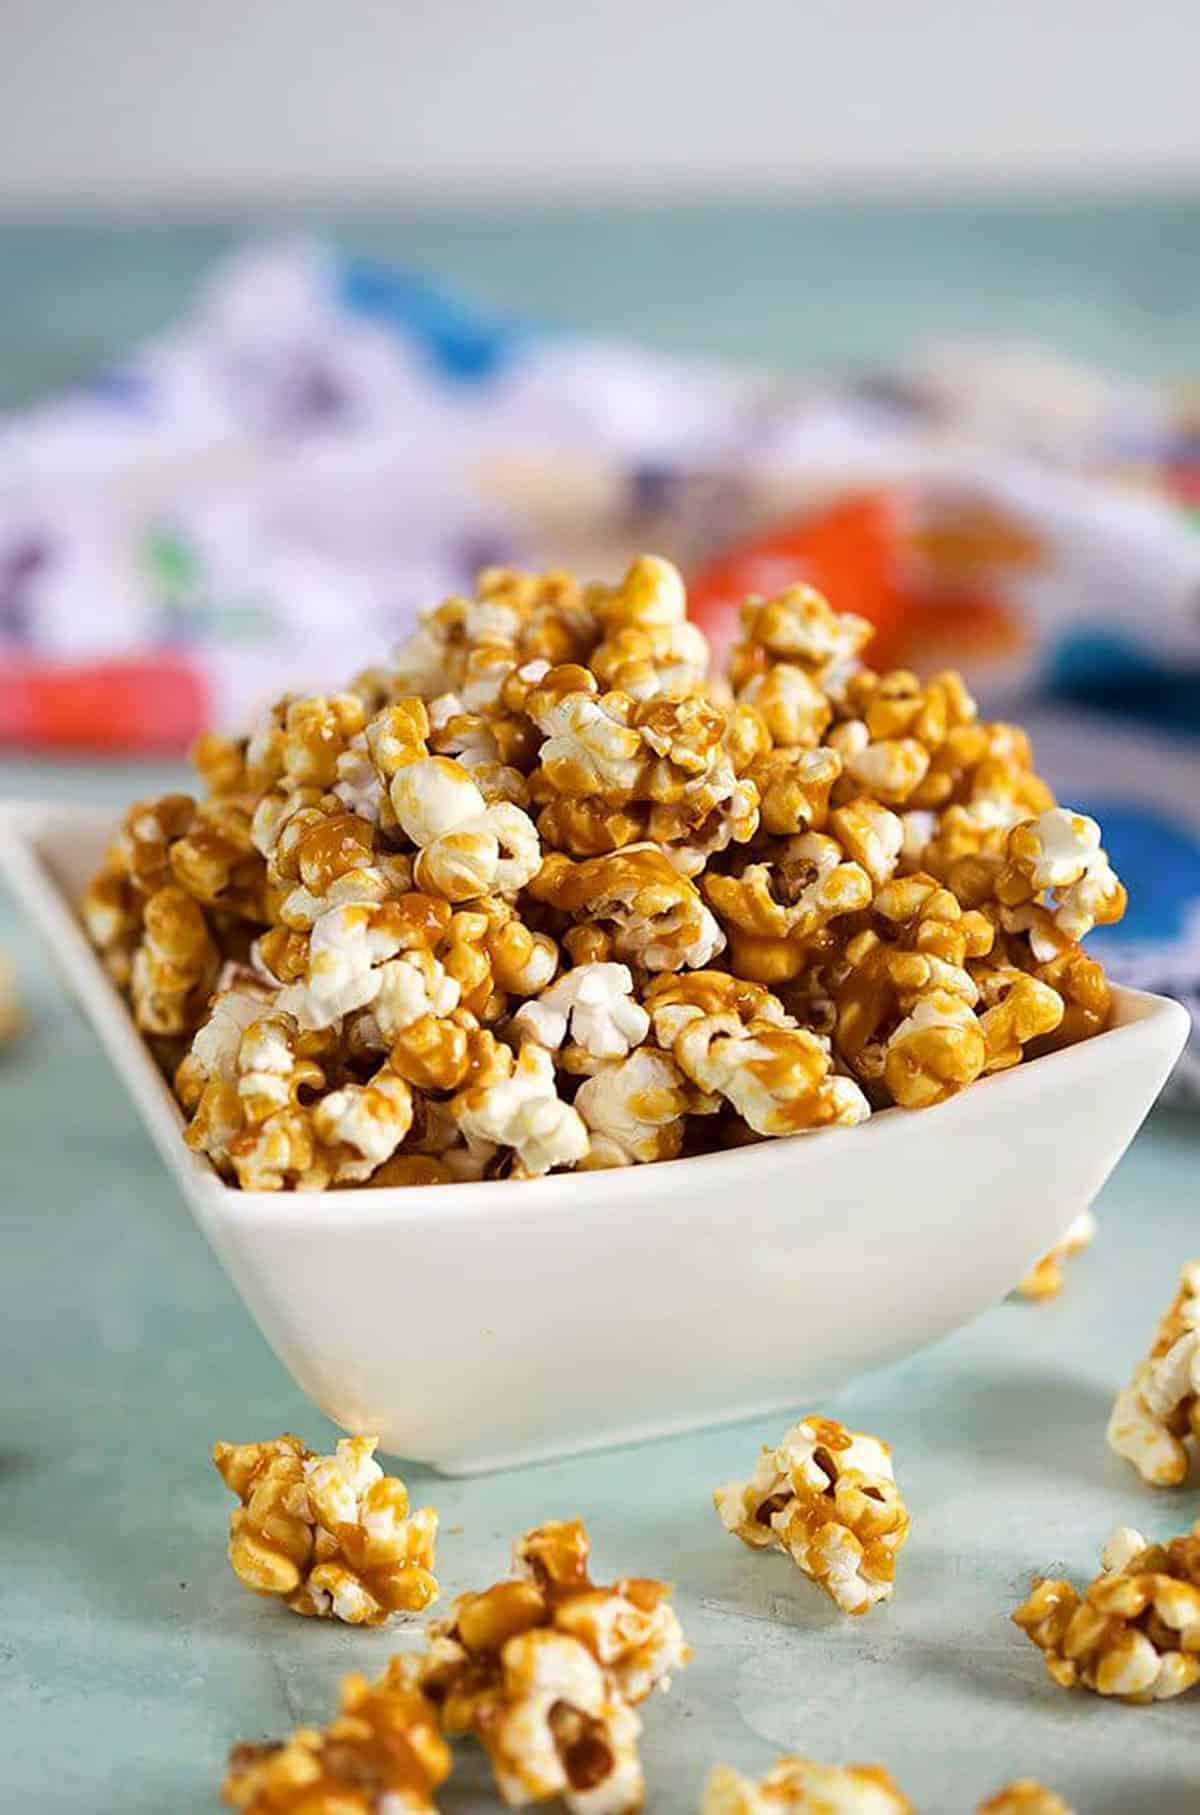 Caramel Popcorn in a white bowl on a blue background.